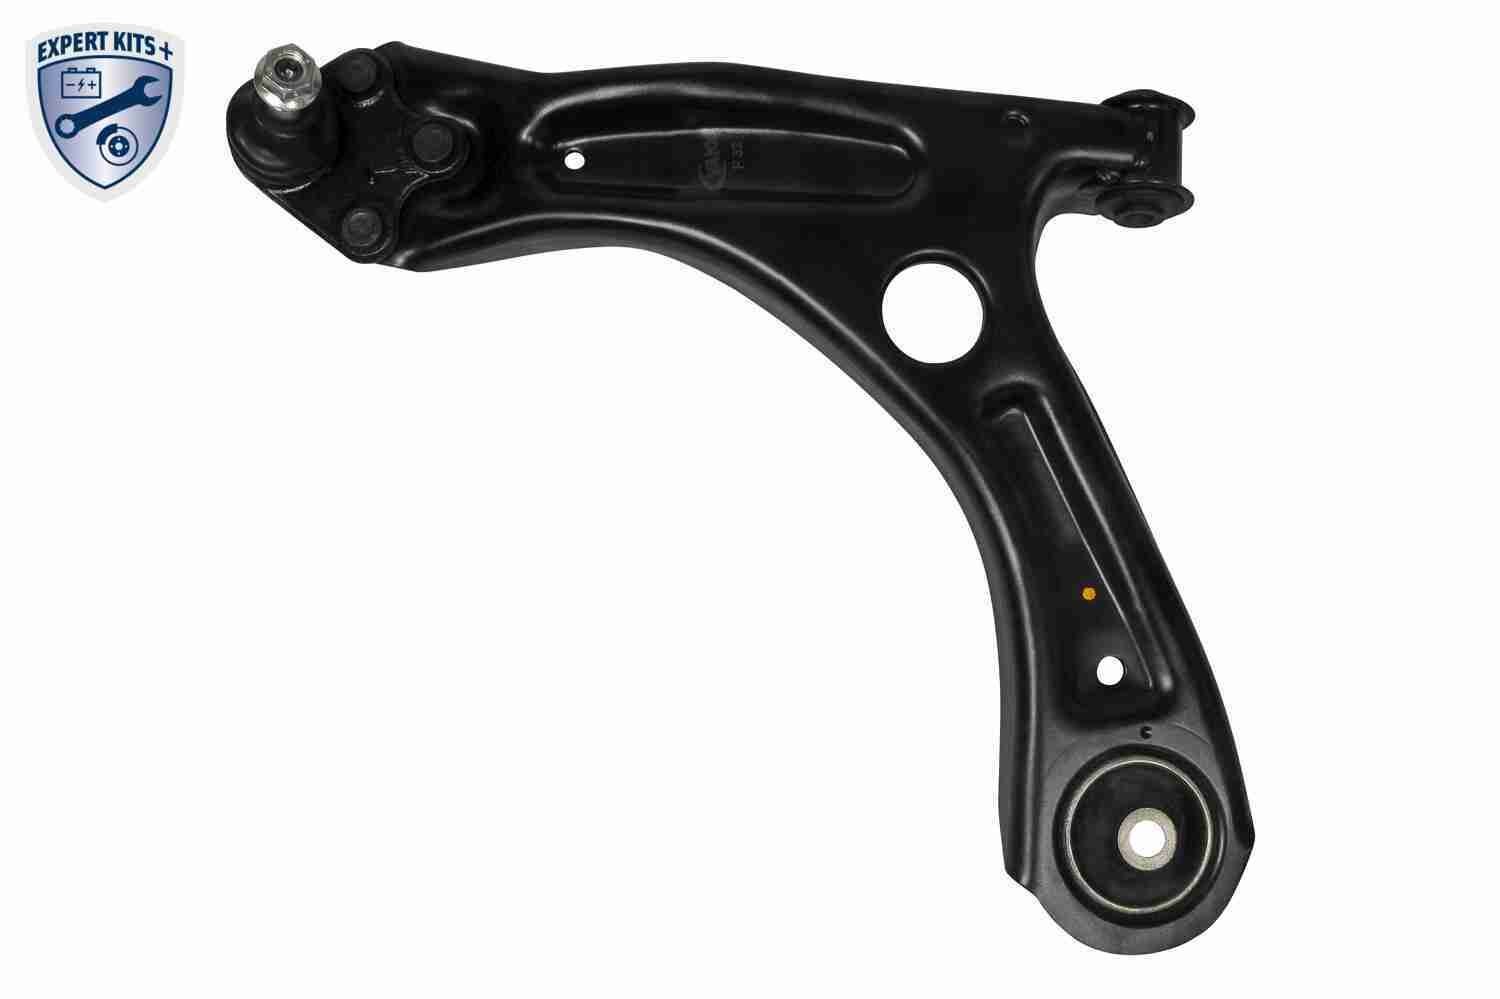 VAICO V10-3145 Suspension arm EXPERT KITS +, with ball joint, Lower, Front Axle Left, Control Arm